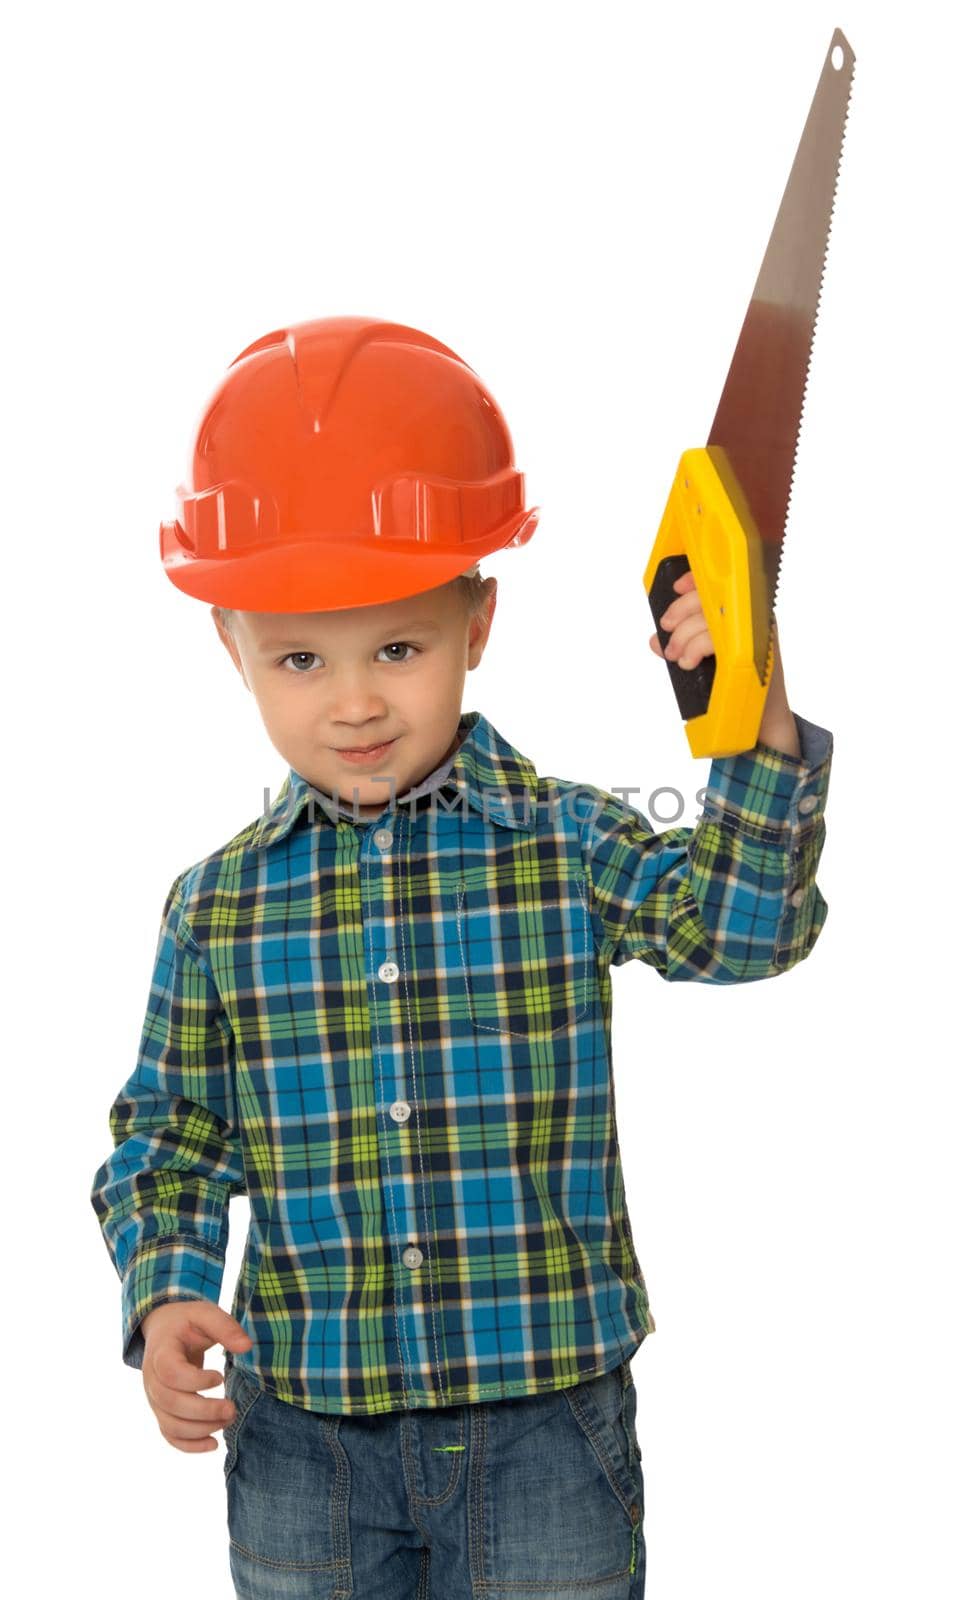 Llittle boy in a hard hat holding a saw - Isolated on white background